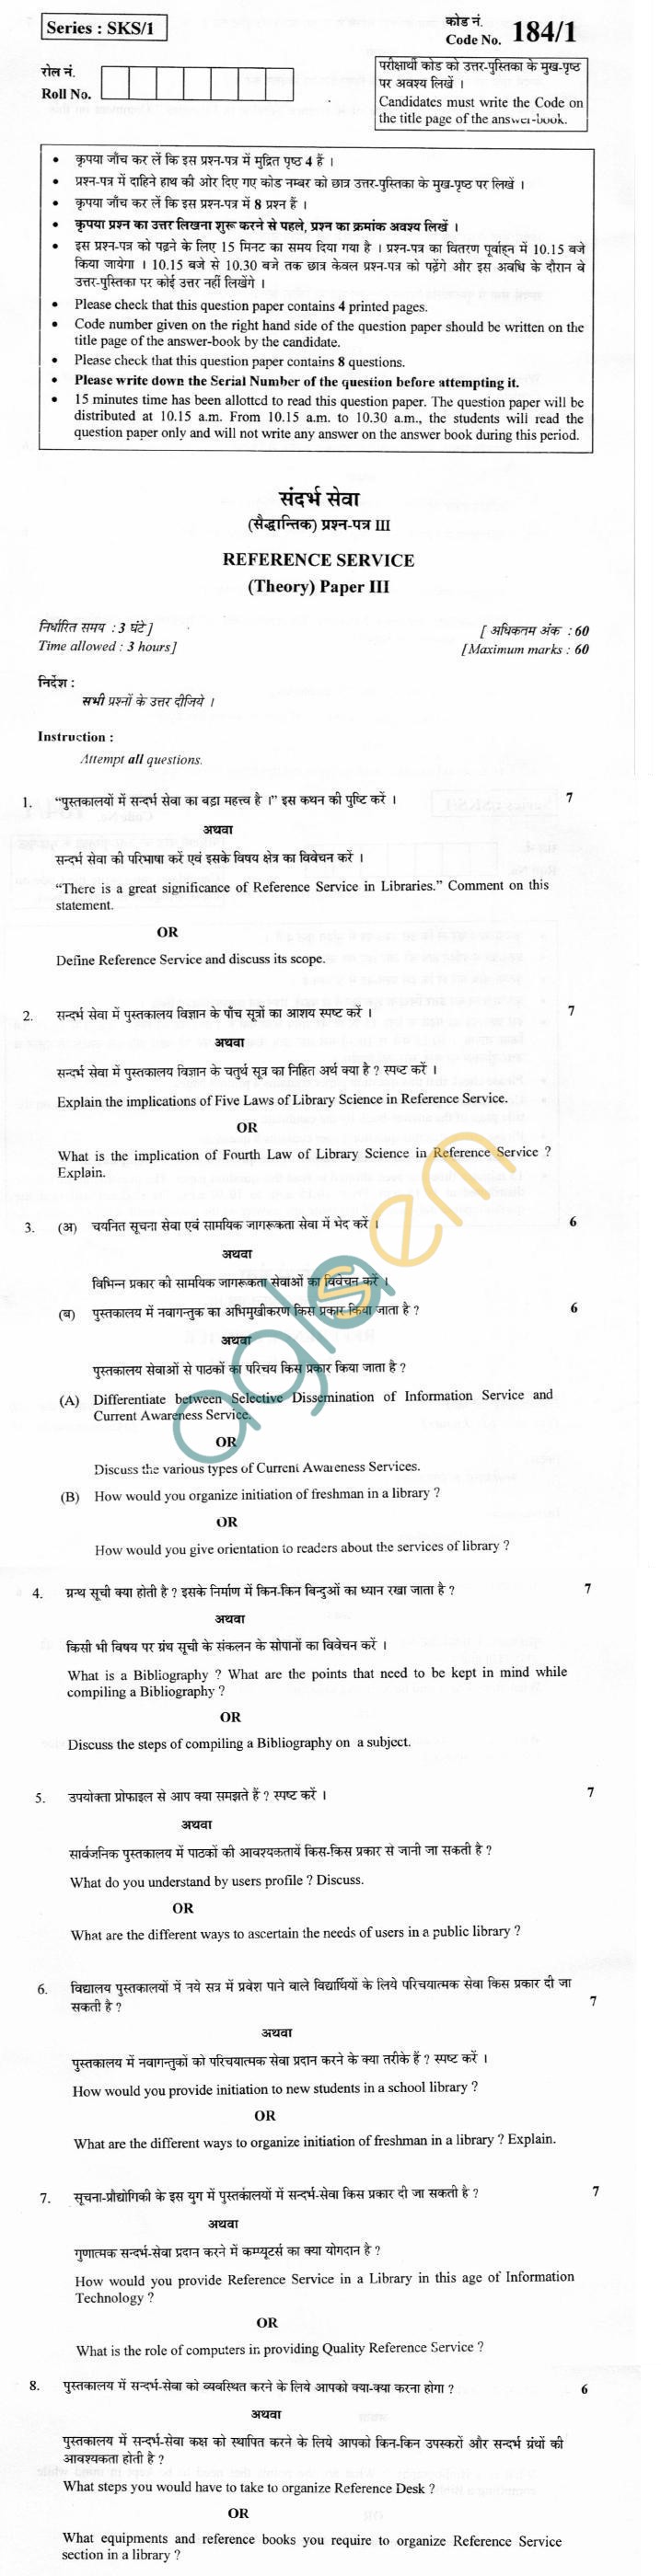 CBSE Board Exam 2013 Class XII Question Paper - Reference Service Paper III